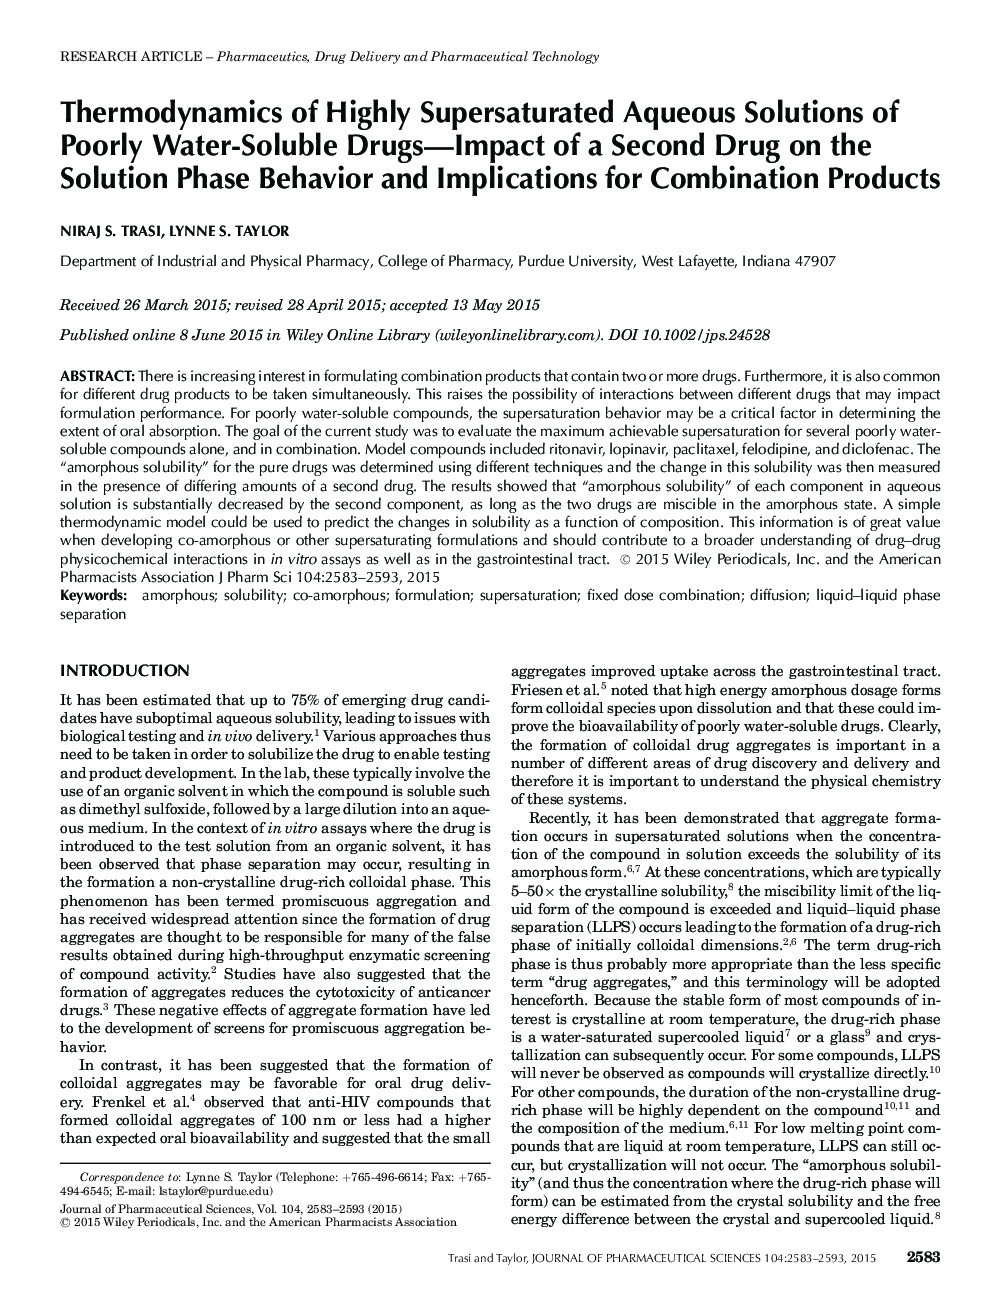 Thermodynamics of Highly Supersaturated Aqueous Solutions of Poorly Water-Soluble Drugs-Impact of a Second Drug on the Solution Phase Behavior and Implications for Combination Products